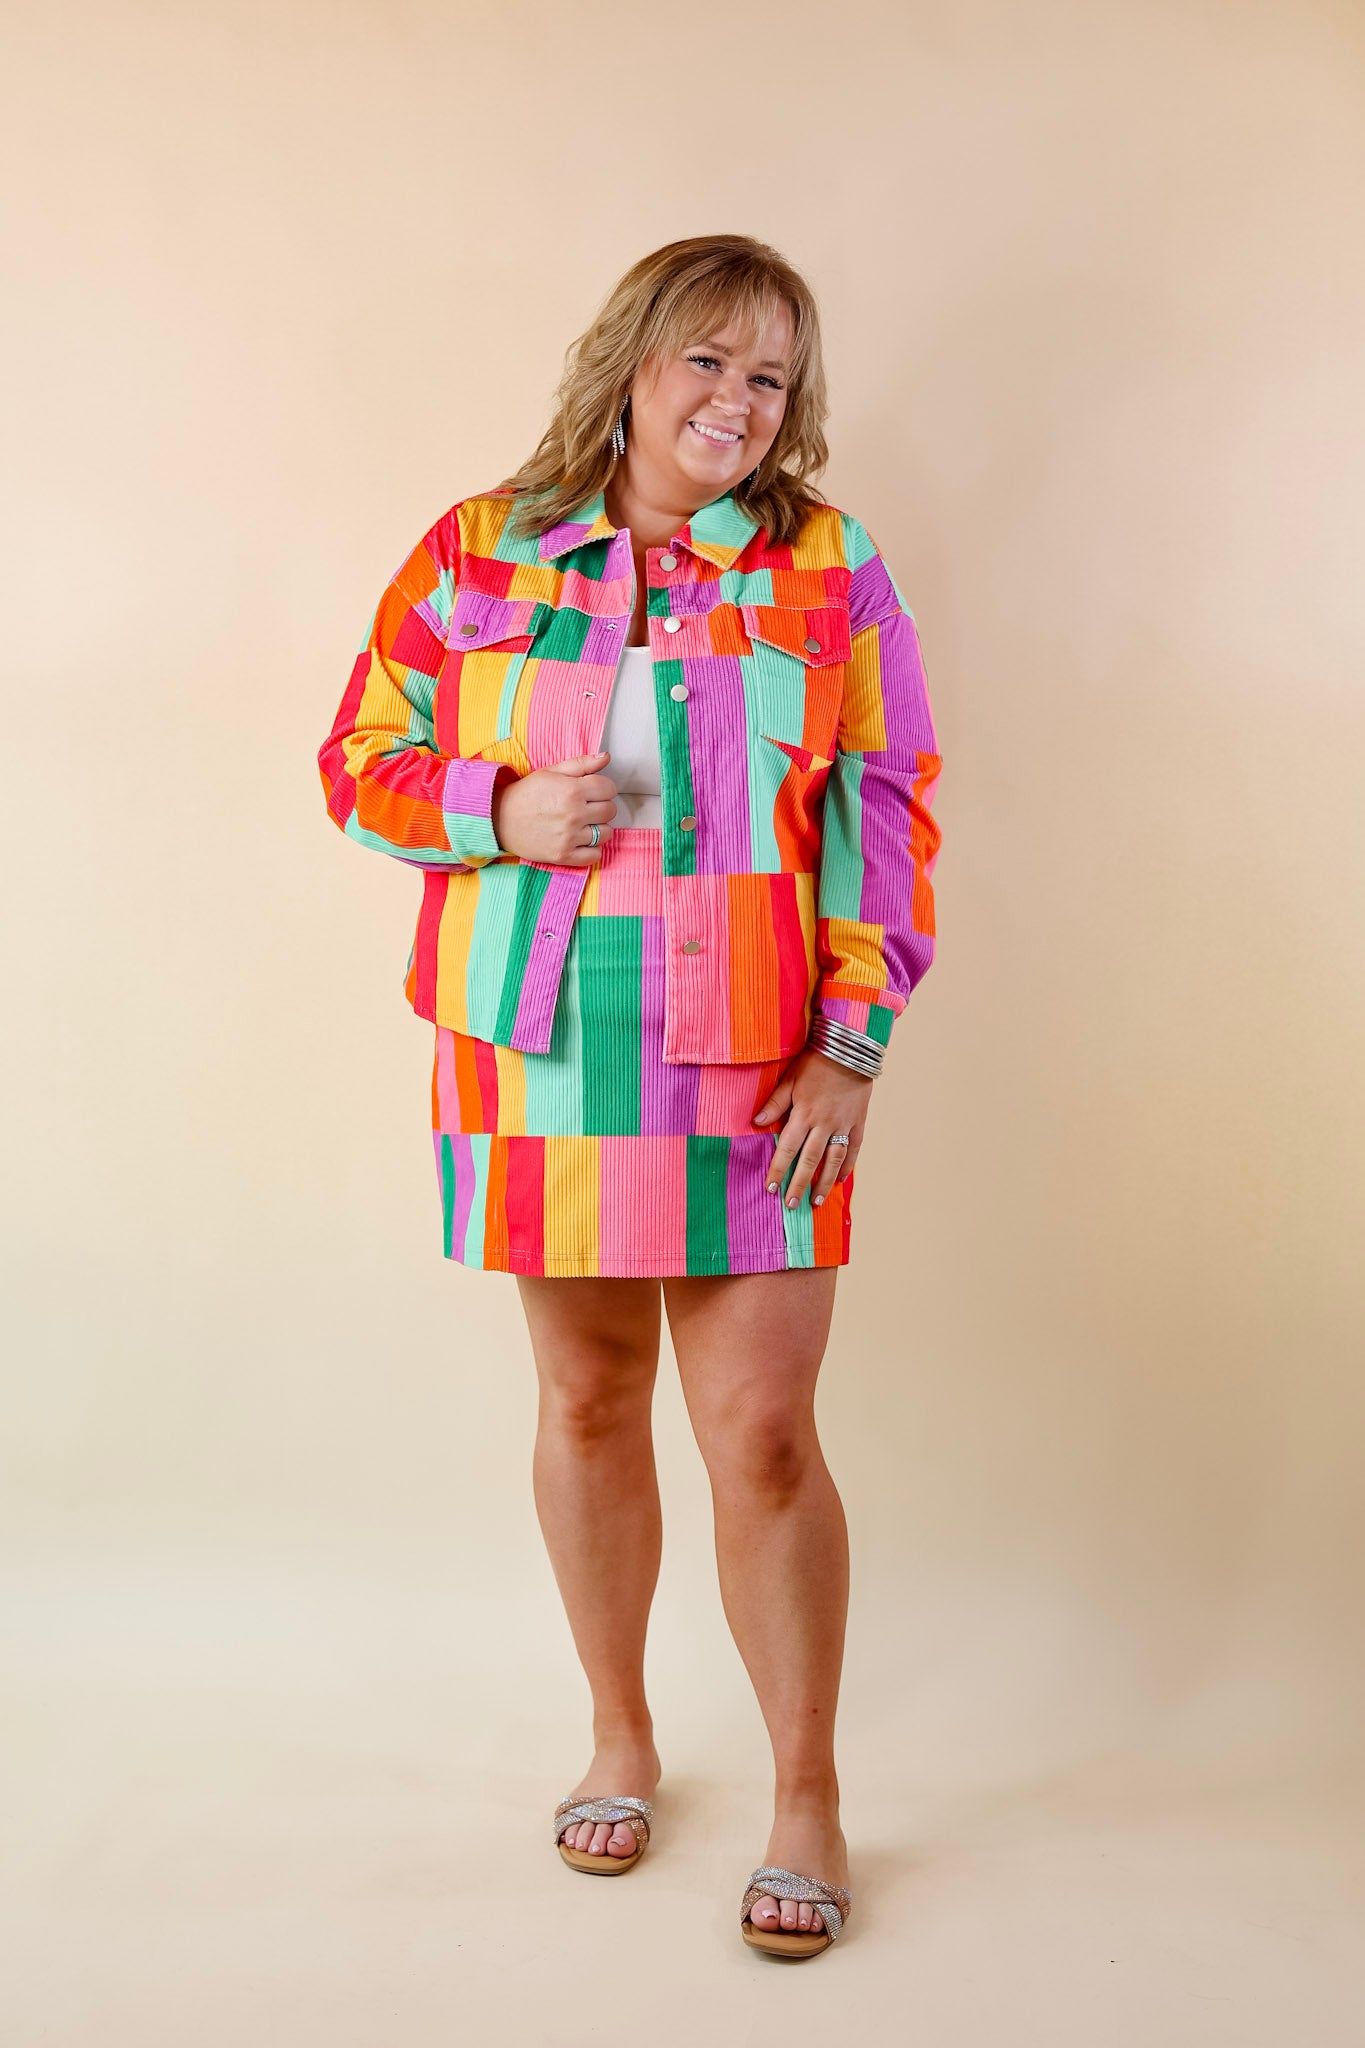 Play It Cool Corduroy Color Block Mini Skirt in Multi - Giddy Up Glamour Boutique